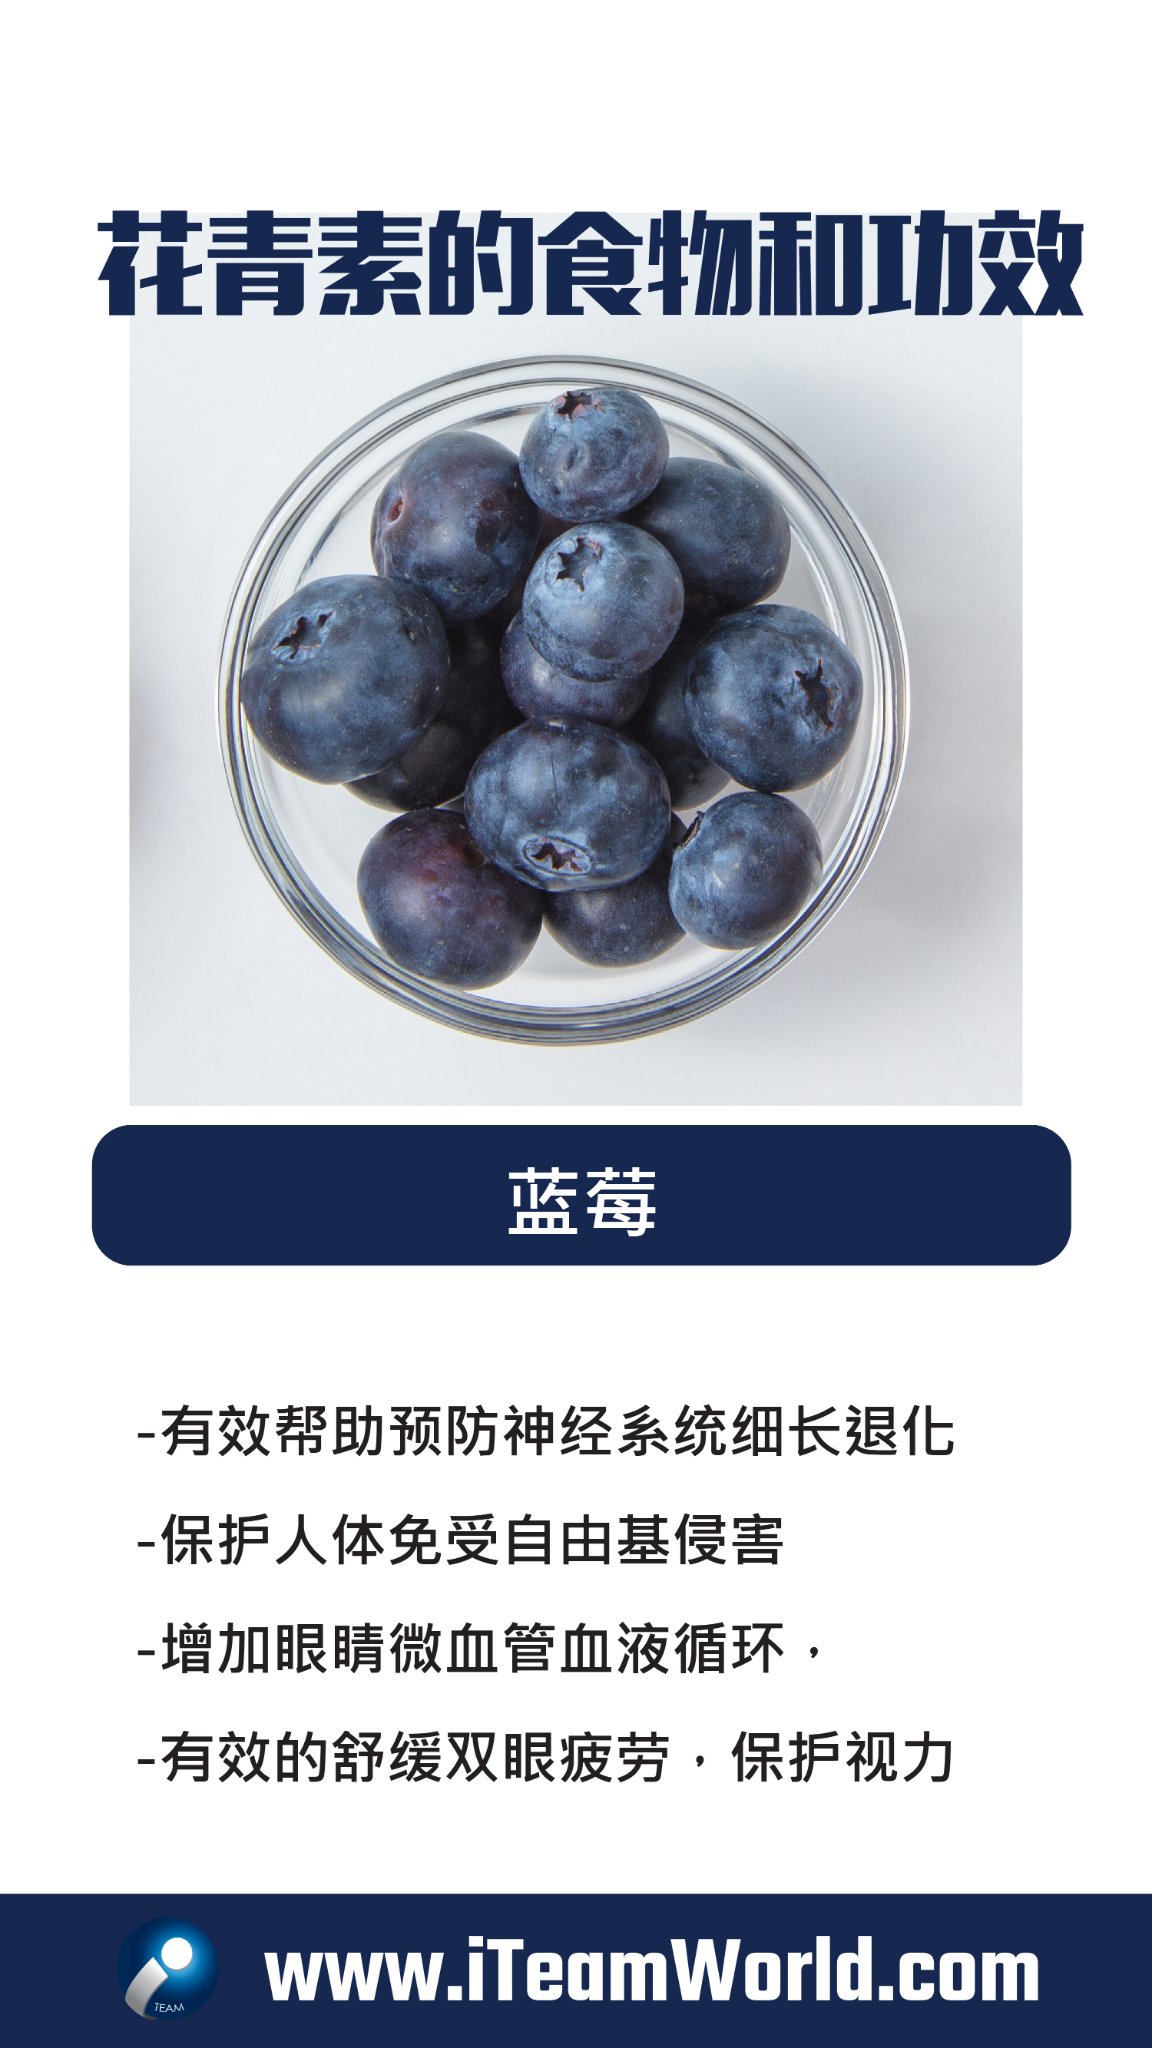 Gout, Blueberry